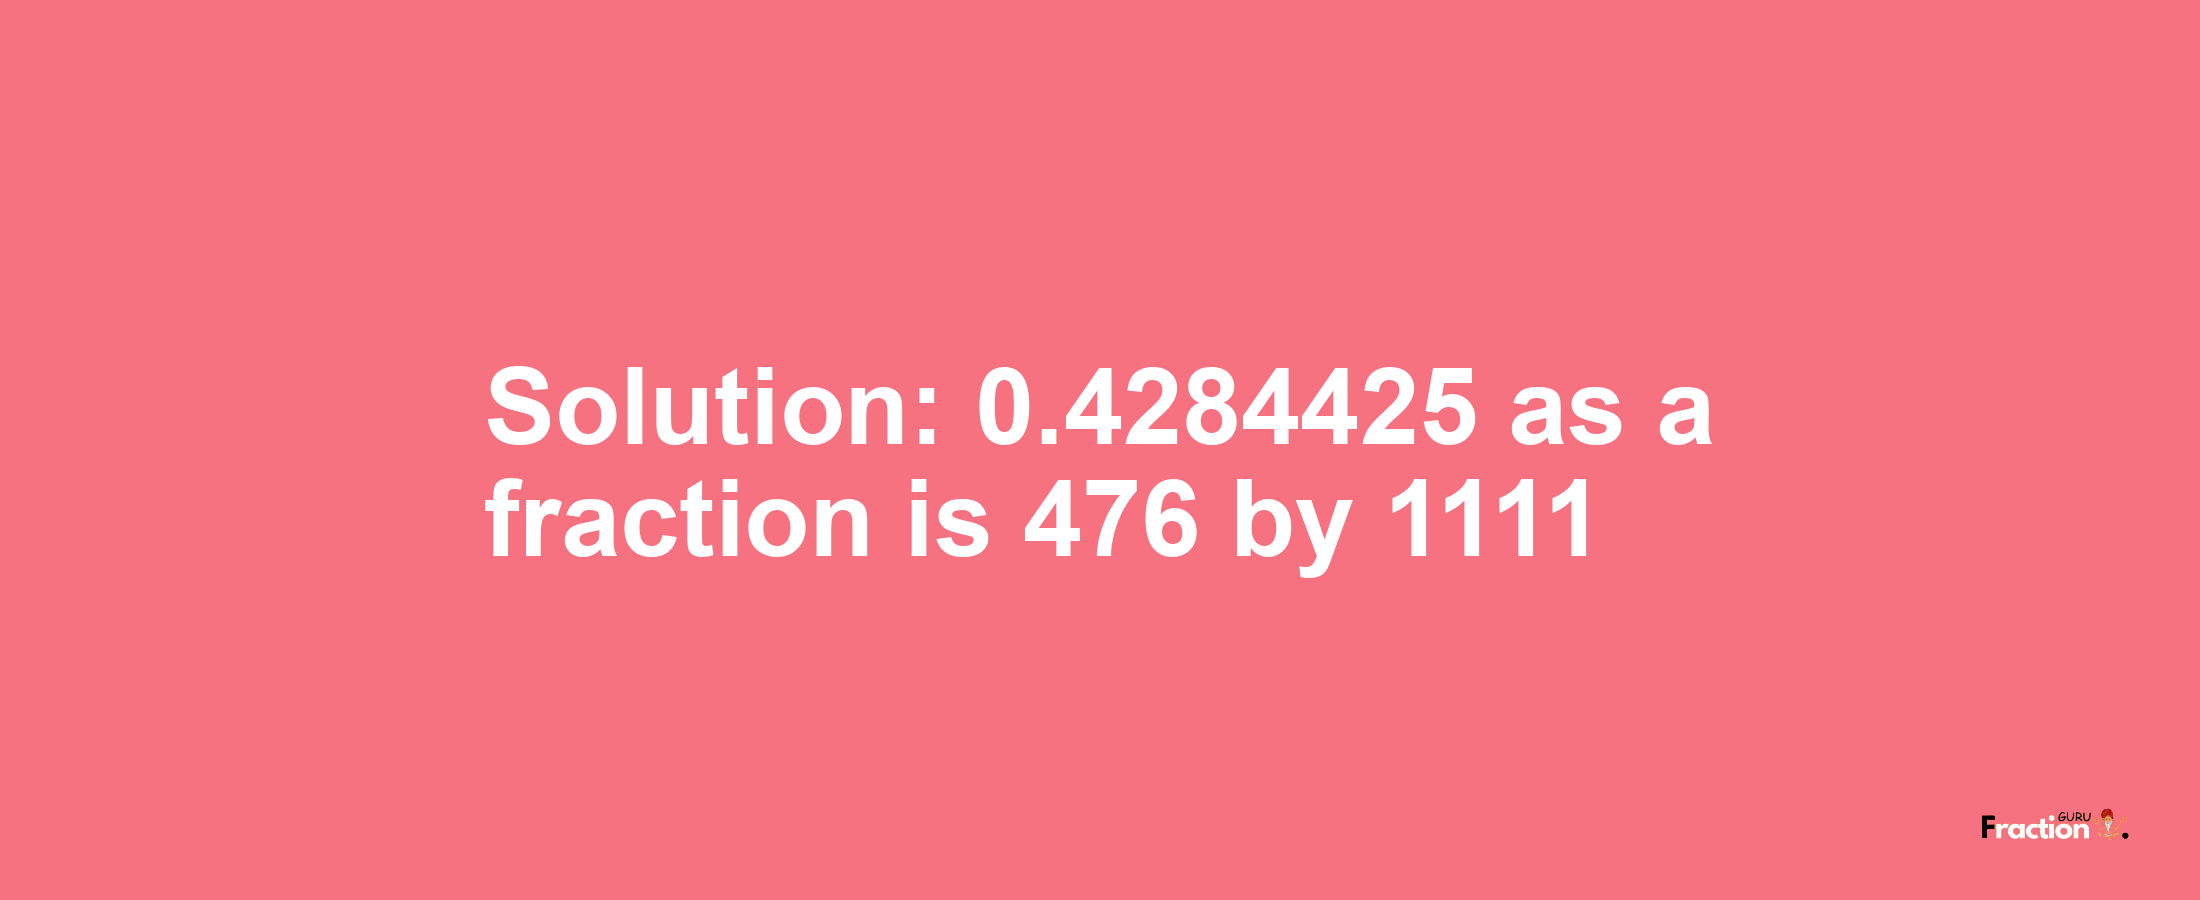 Solution:0.4284425 as a fraction is 476/1111